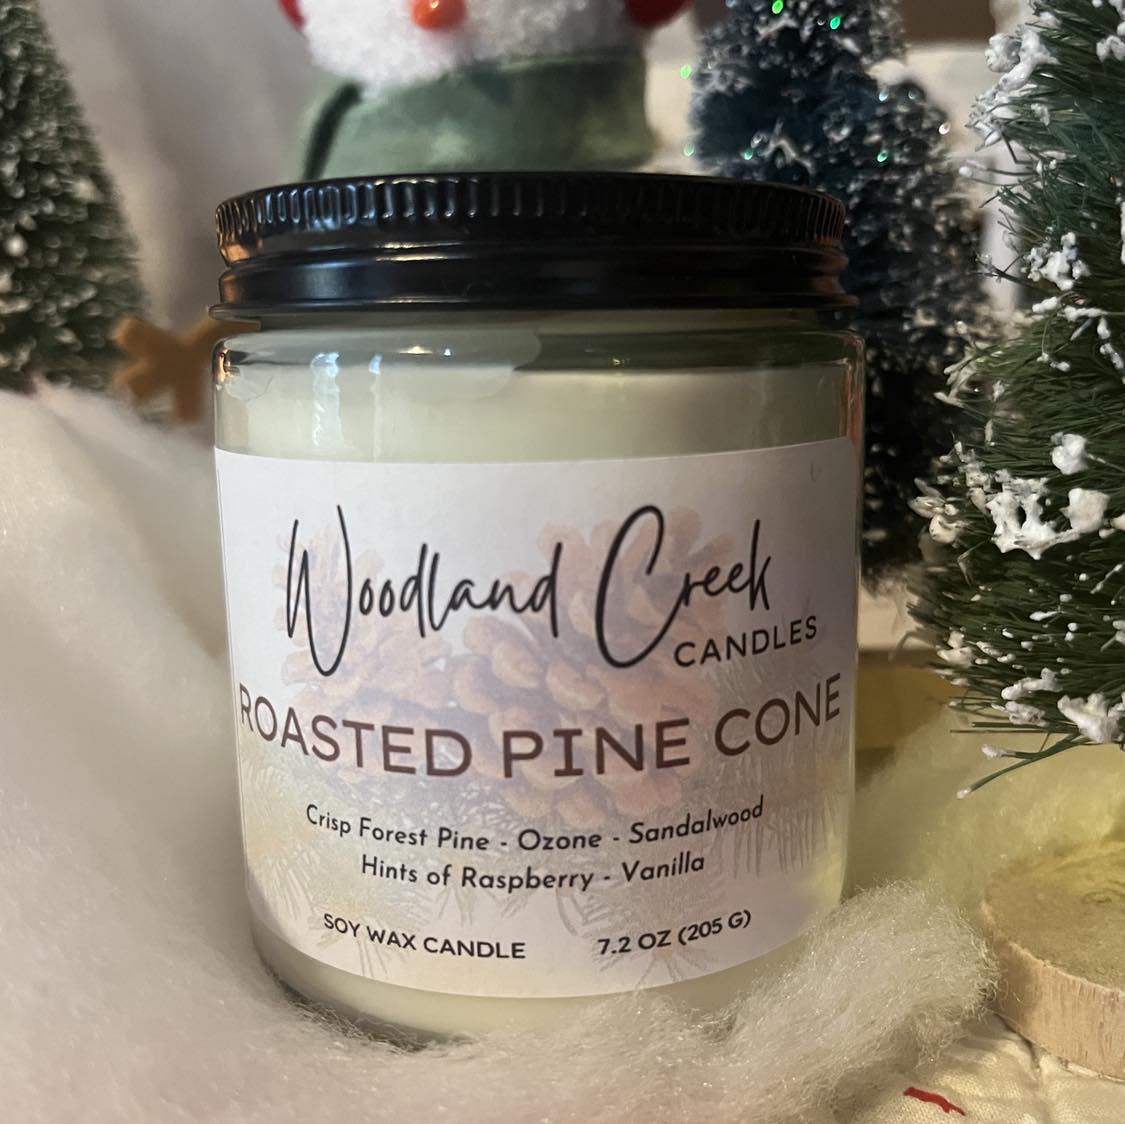 Roasted Pine Cone Soy Wax Candle